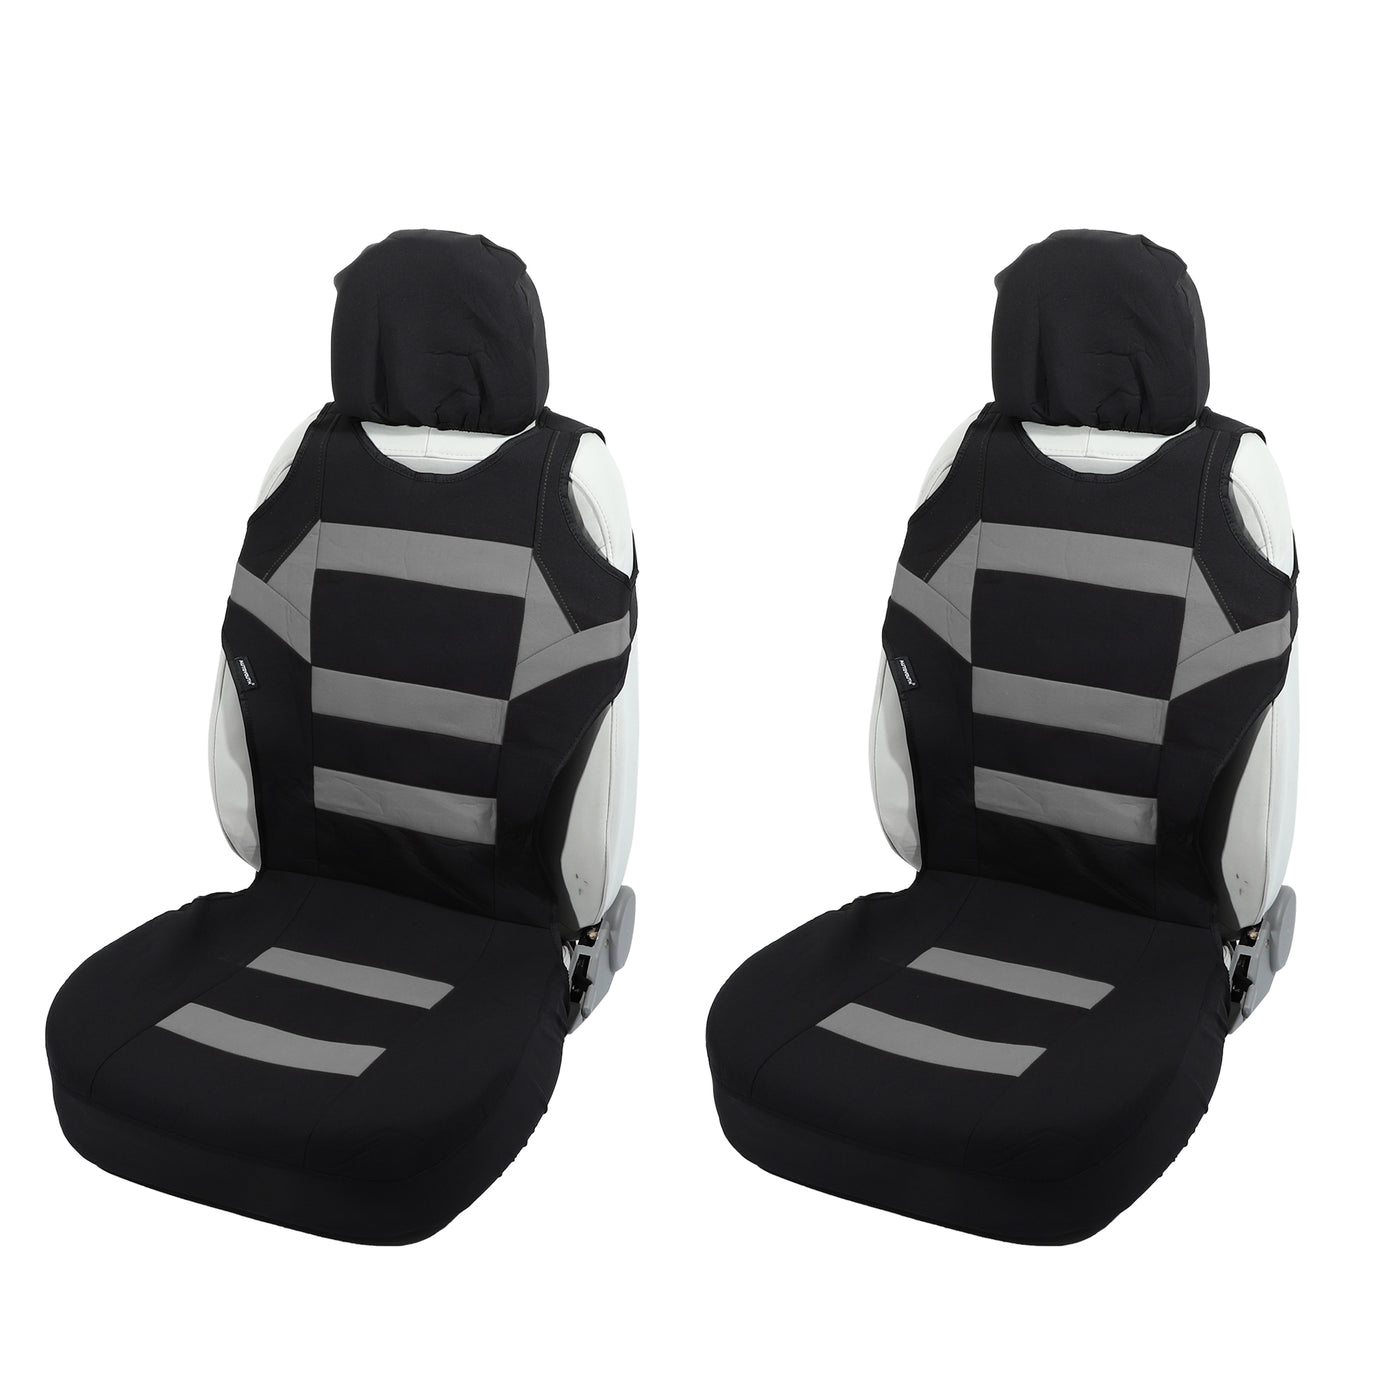 ACROPIX Front Car Seat Cover Universal Seat Protectors Seat Cushion Cover Gray - Pack of 2